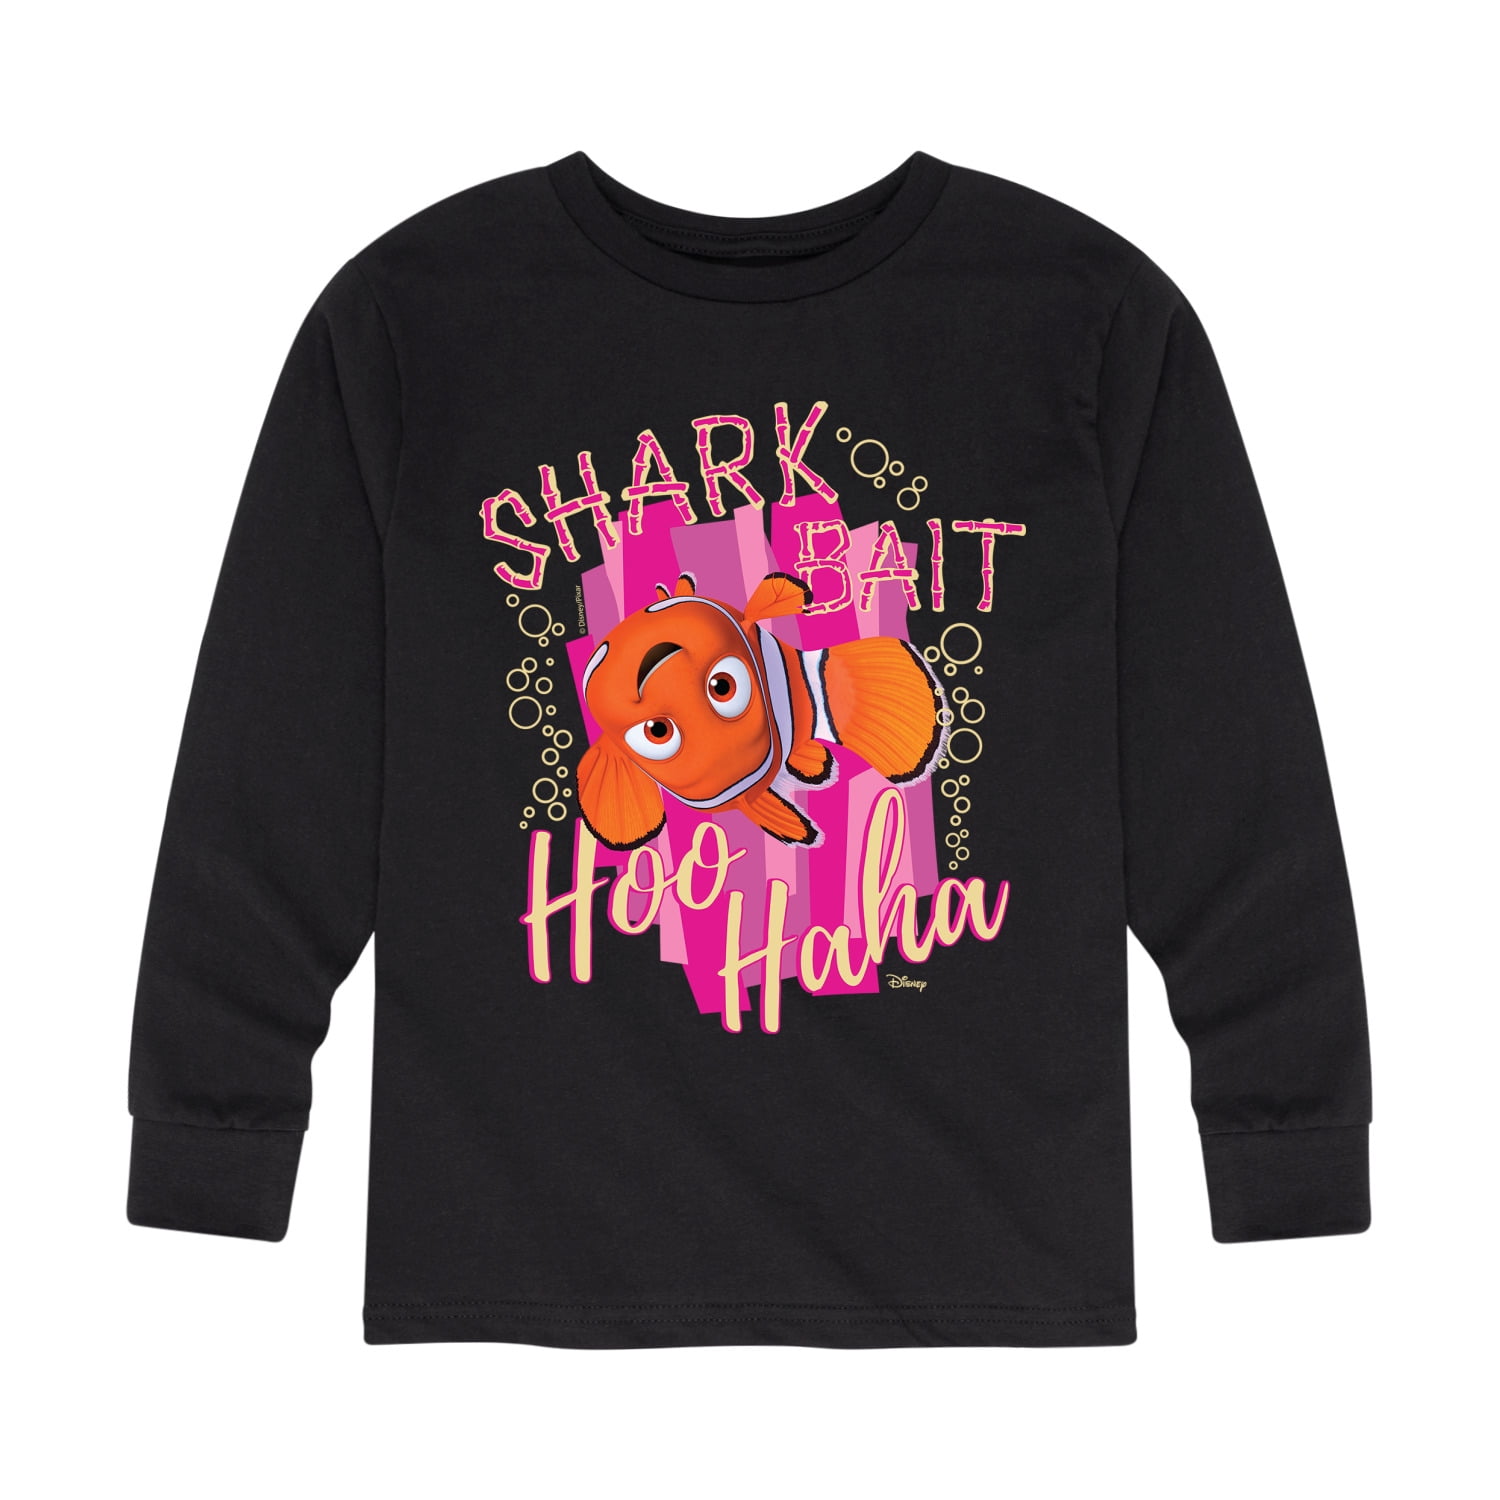 Finding Nemo - Shark Bait Hoo Haha - Toddler And Youth Long